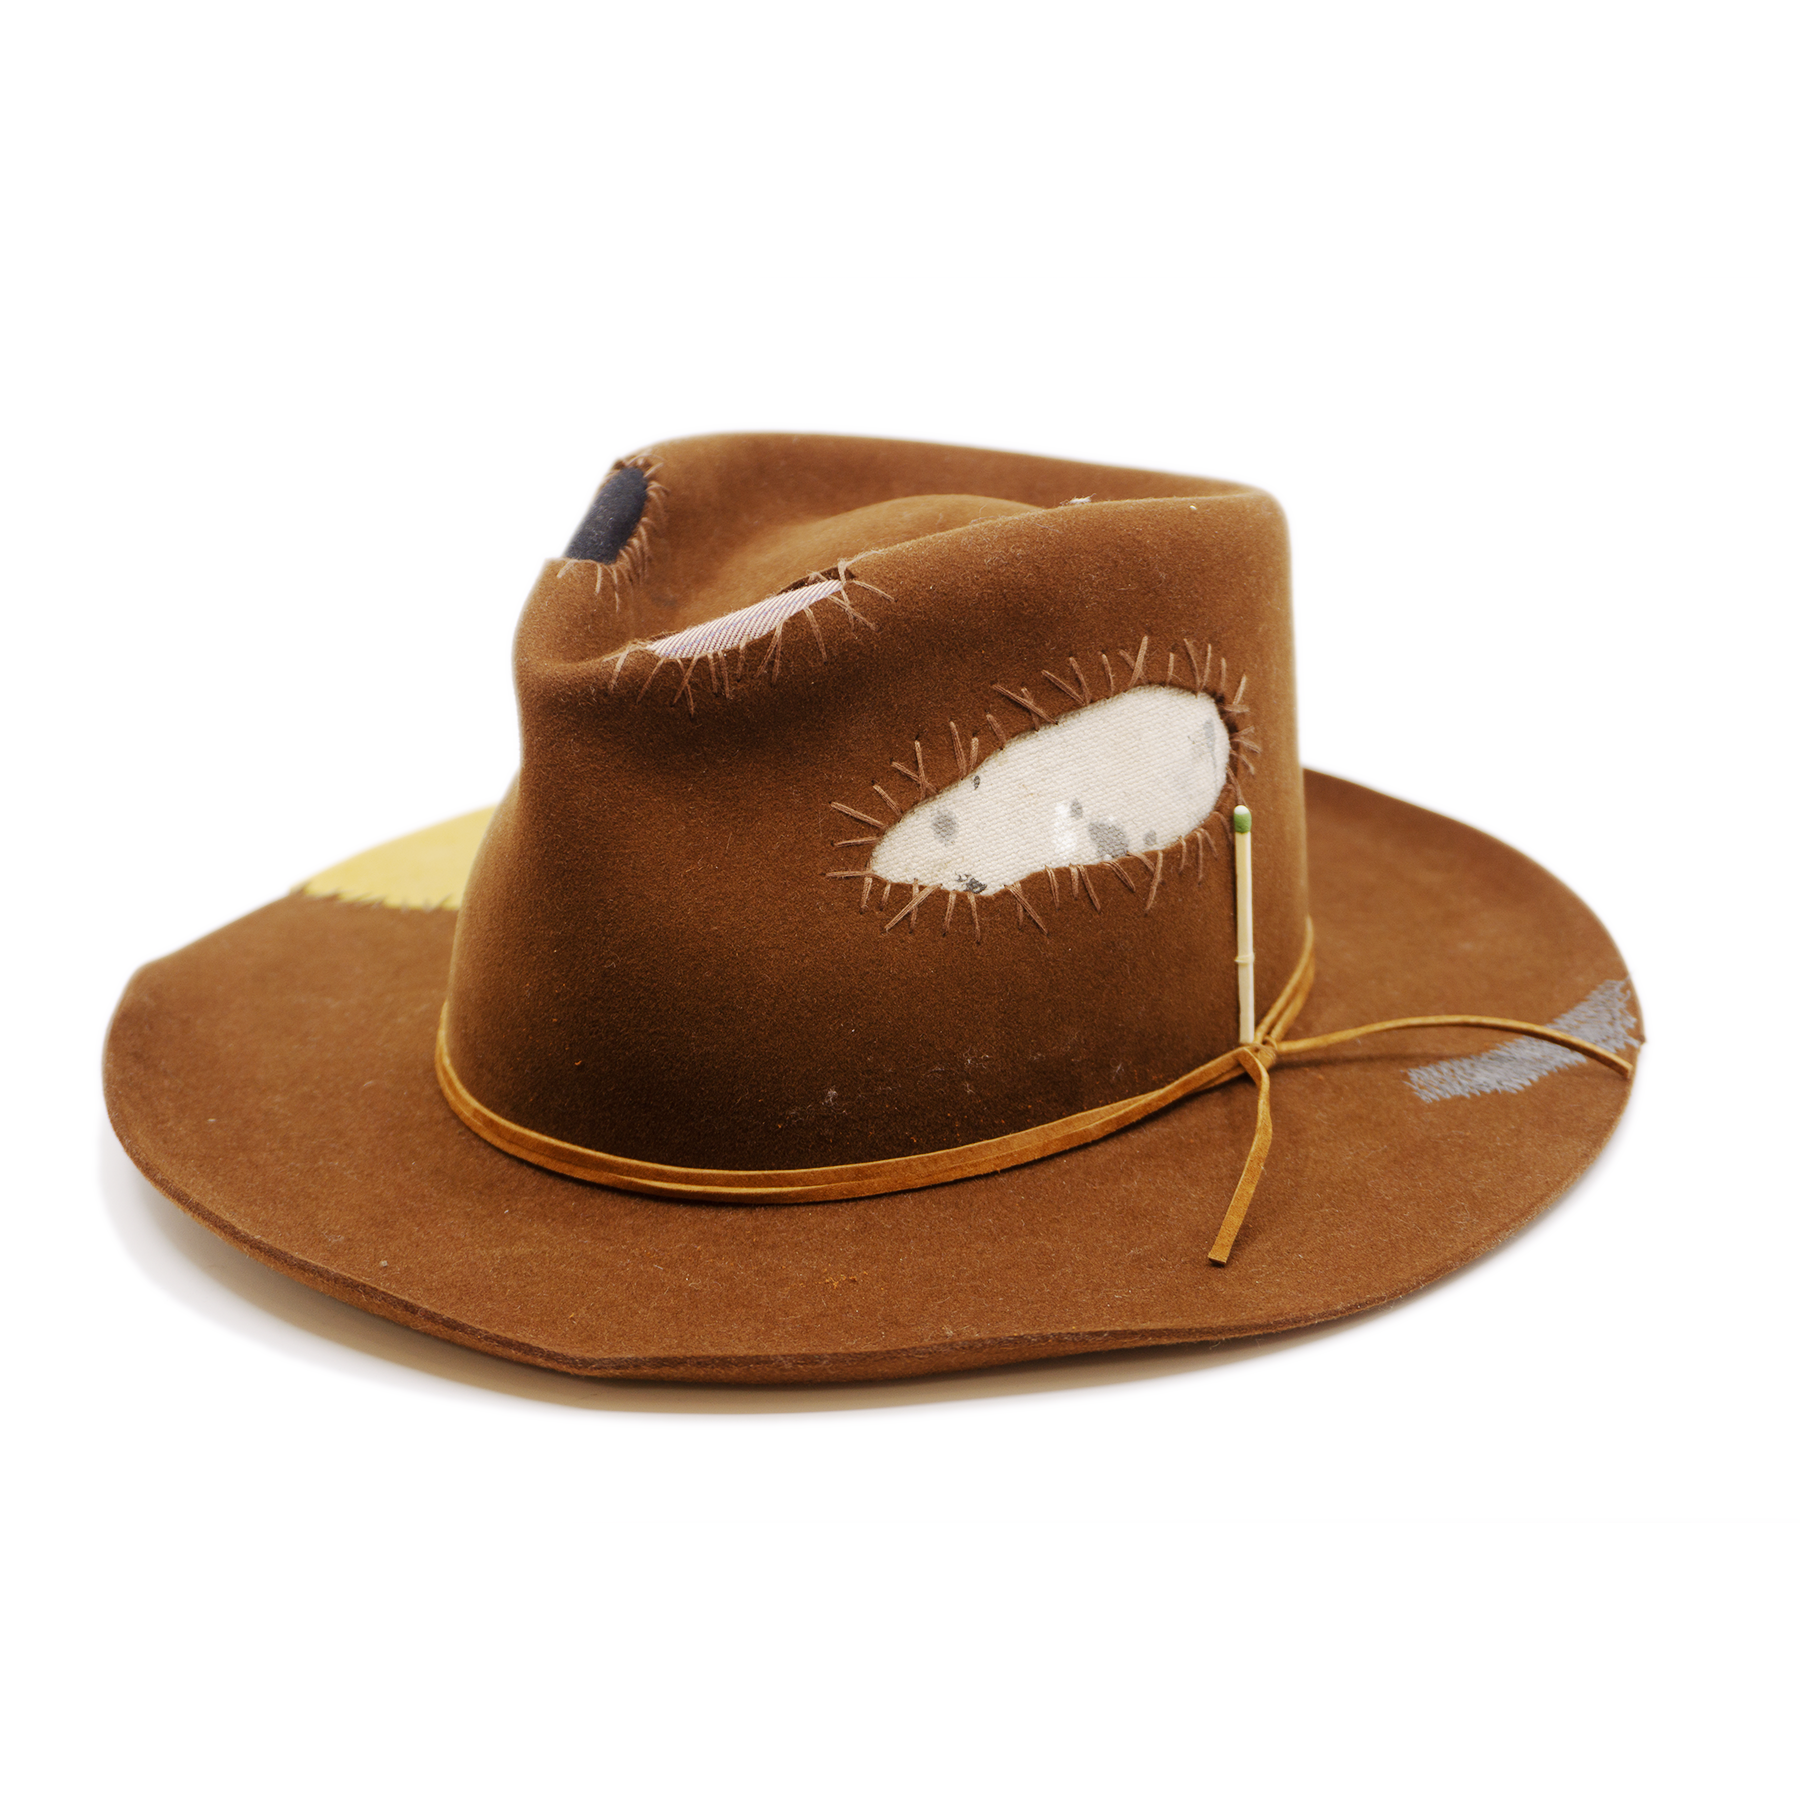 100% felt hat in Pimp Brown   Western Weight   Tonal suede lace wrapped twice   4 cut outs with two felt patches and two fabric patches  Tonal whip stitching   Wavy brim   Made in USA